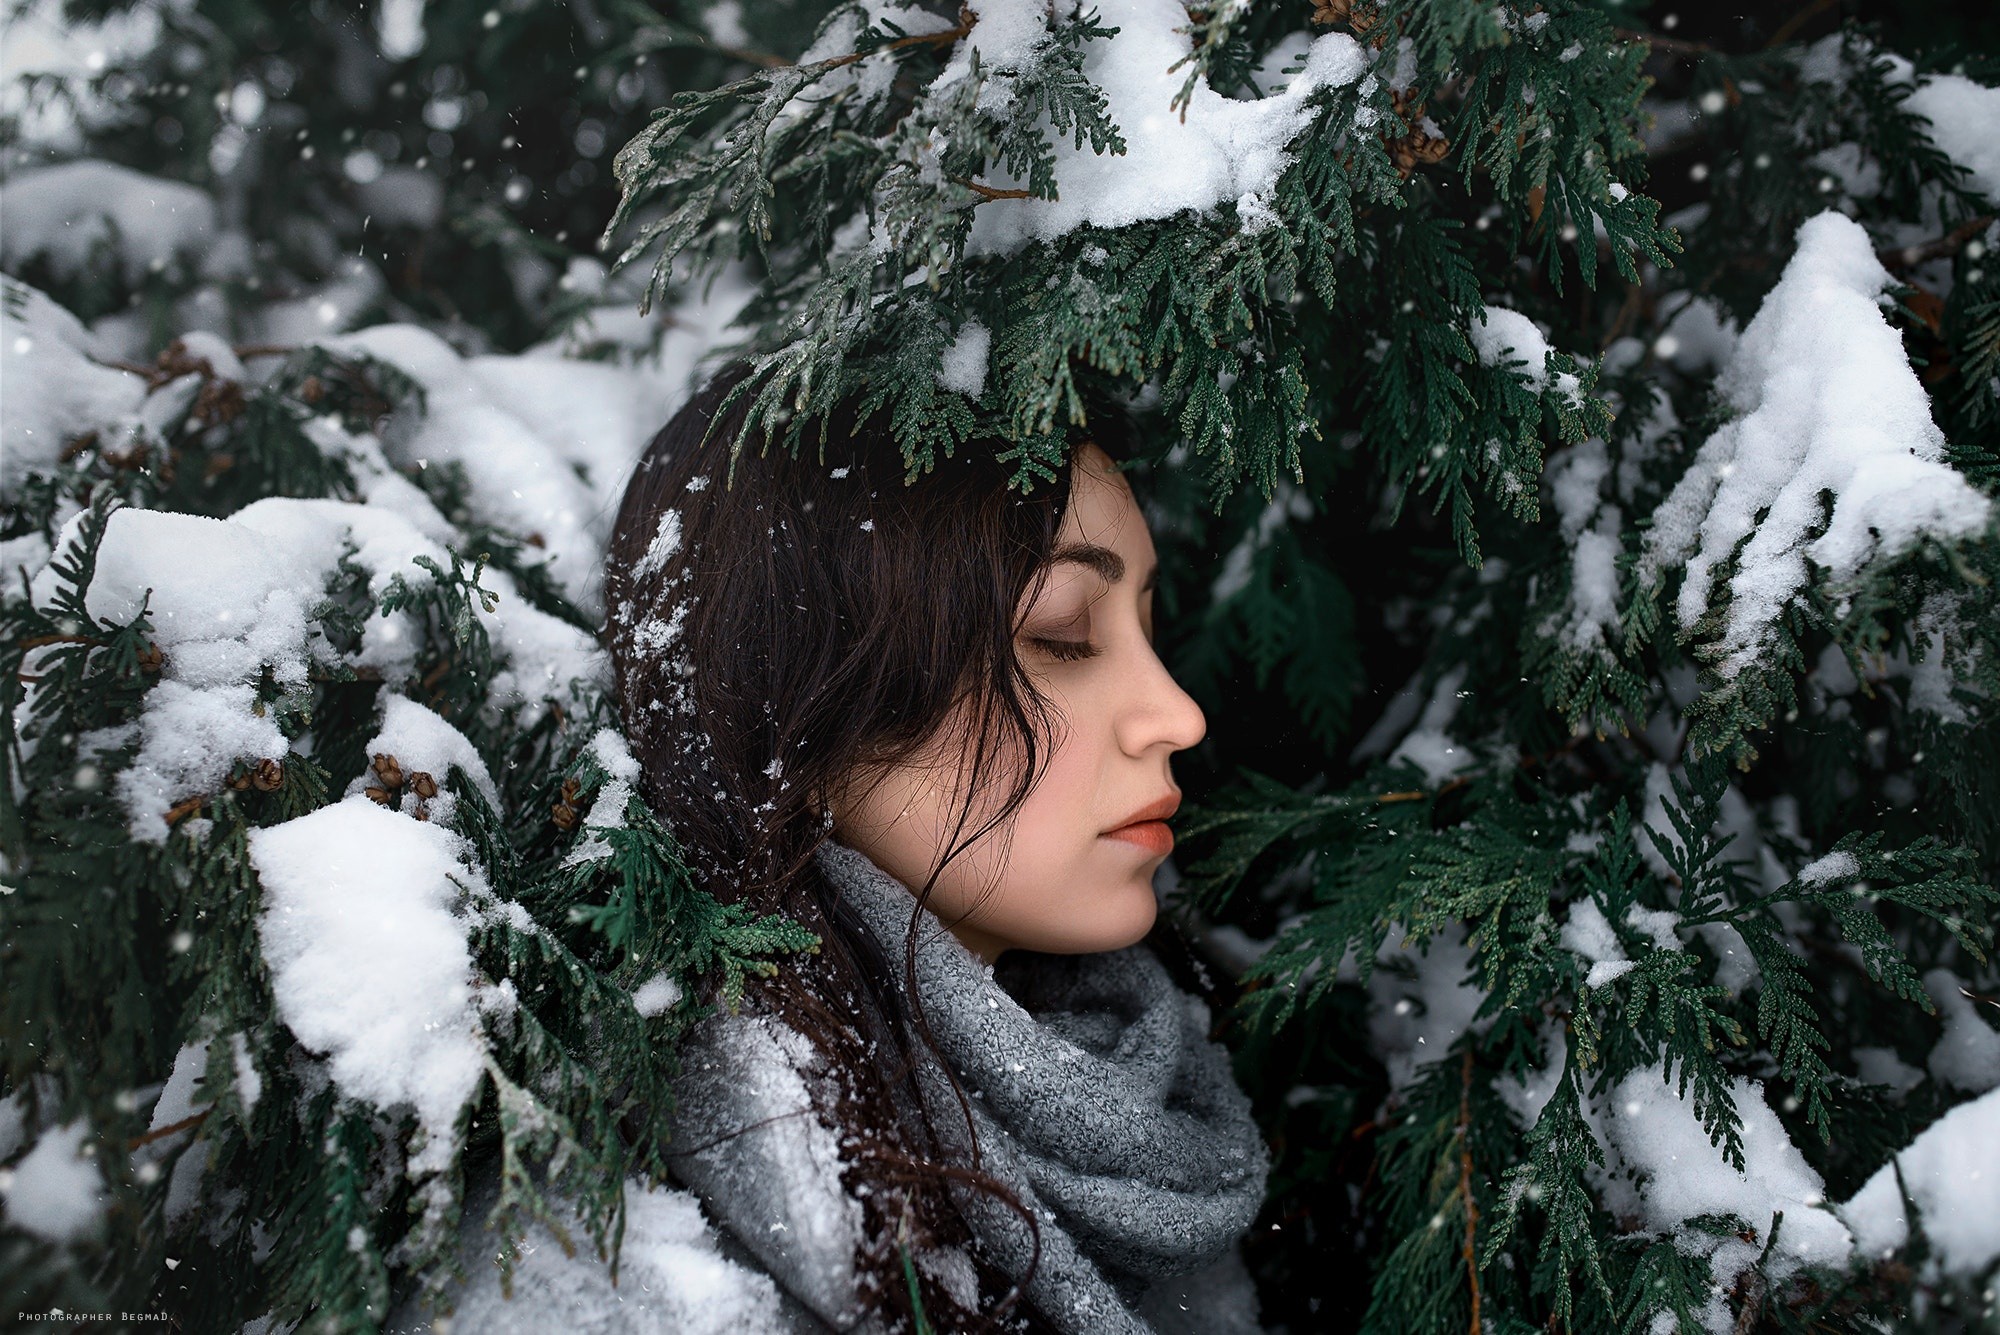 Dima Begma Snow Winter Cold Trees Outdoors Women Outdoors Face Closed Eyes Profile Model Women 2000x1335